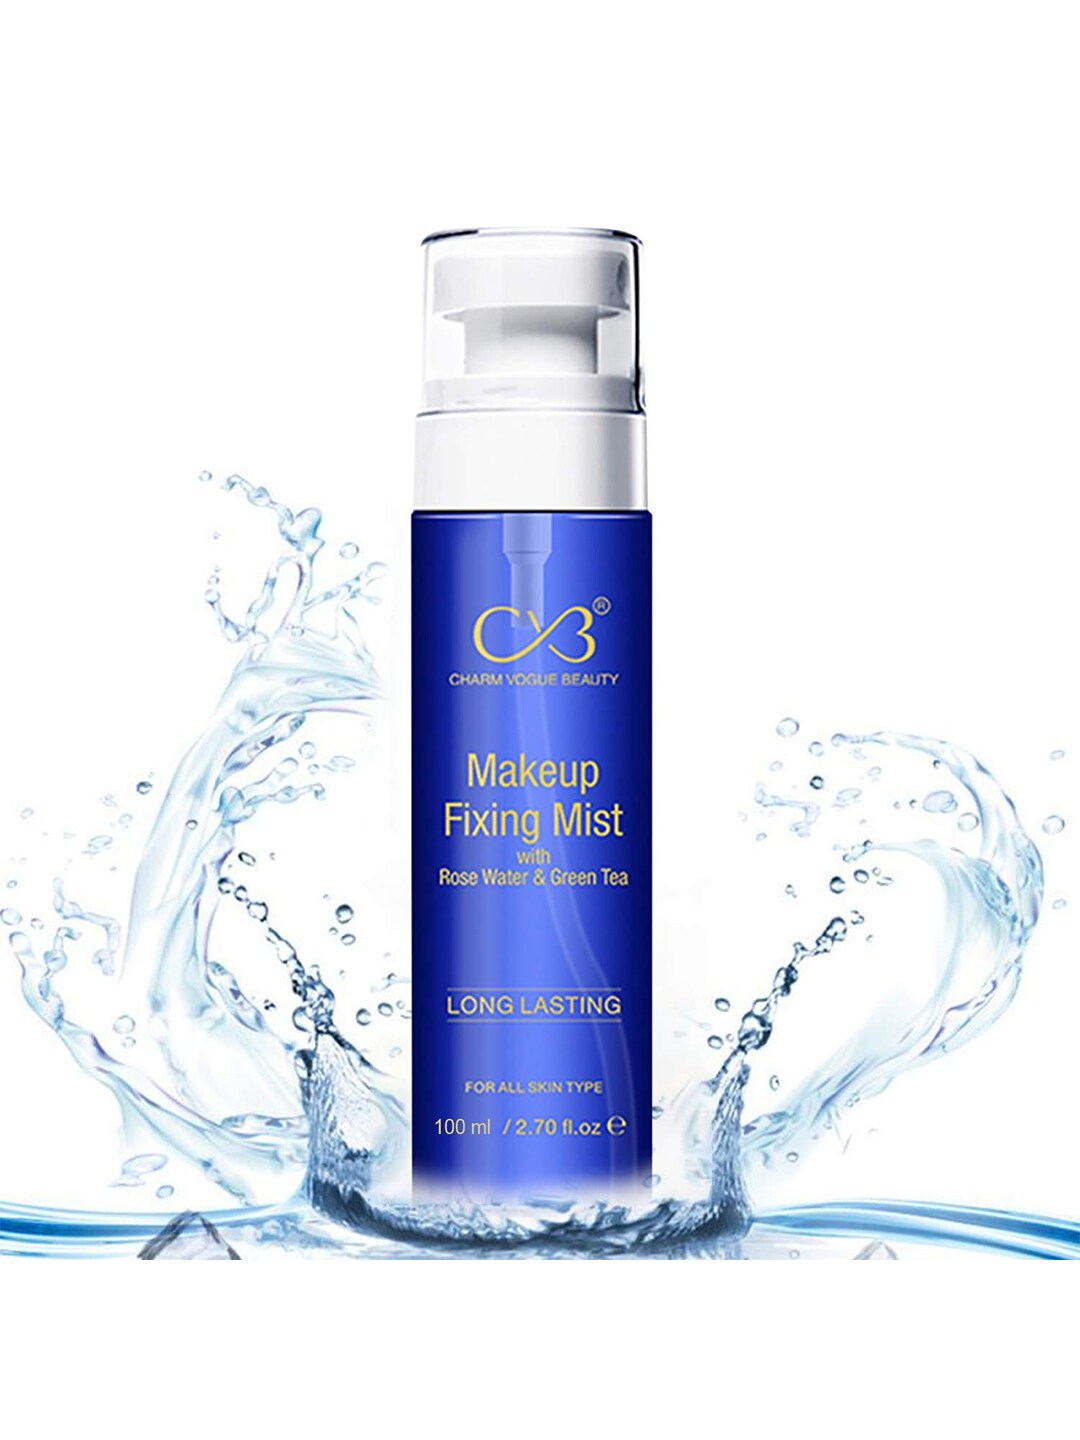 CVB Makeup Fixing Mist with Rose Water & Green Tea 100 ml Price in India